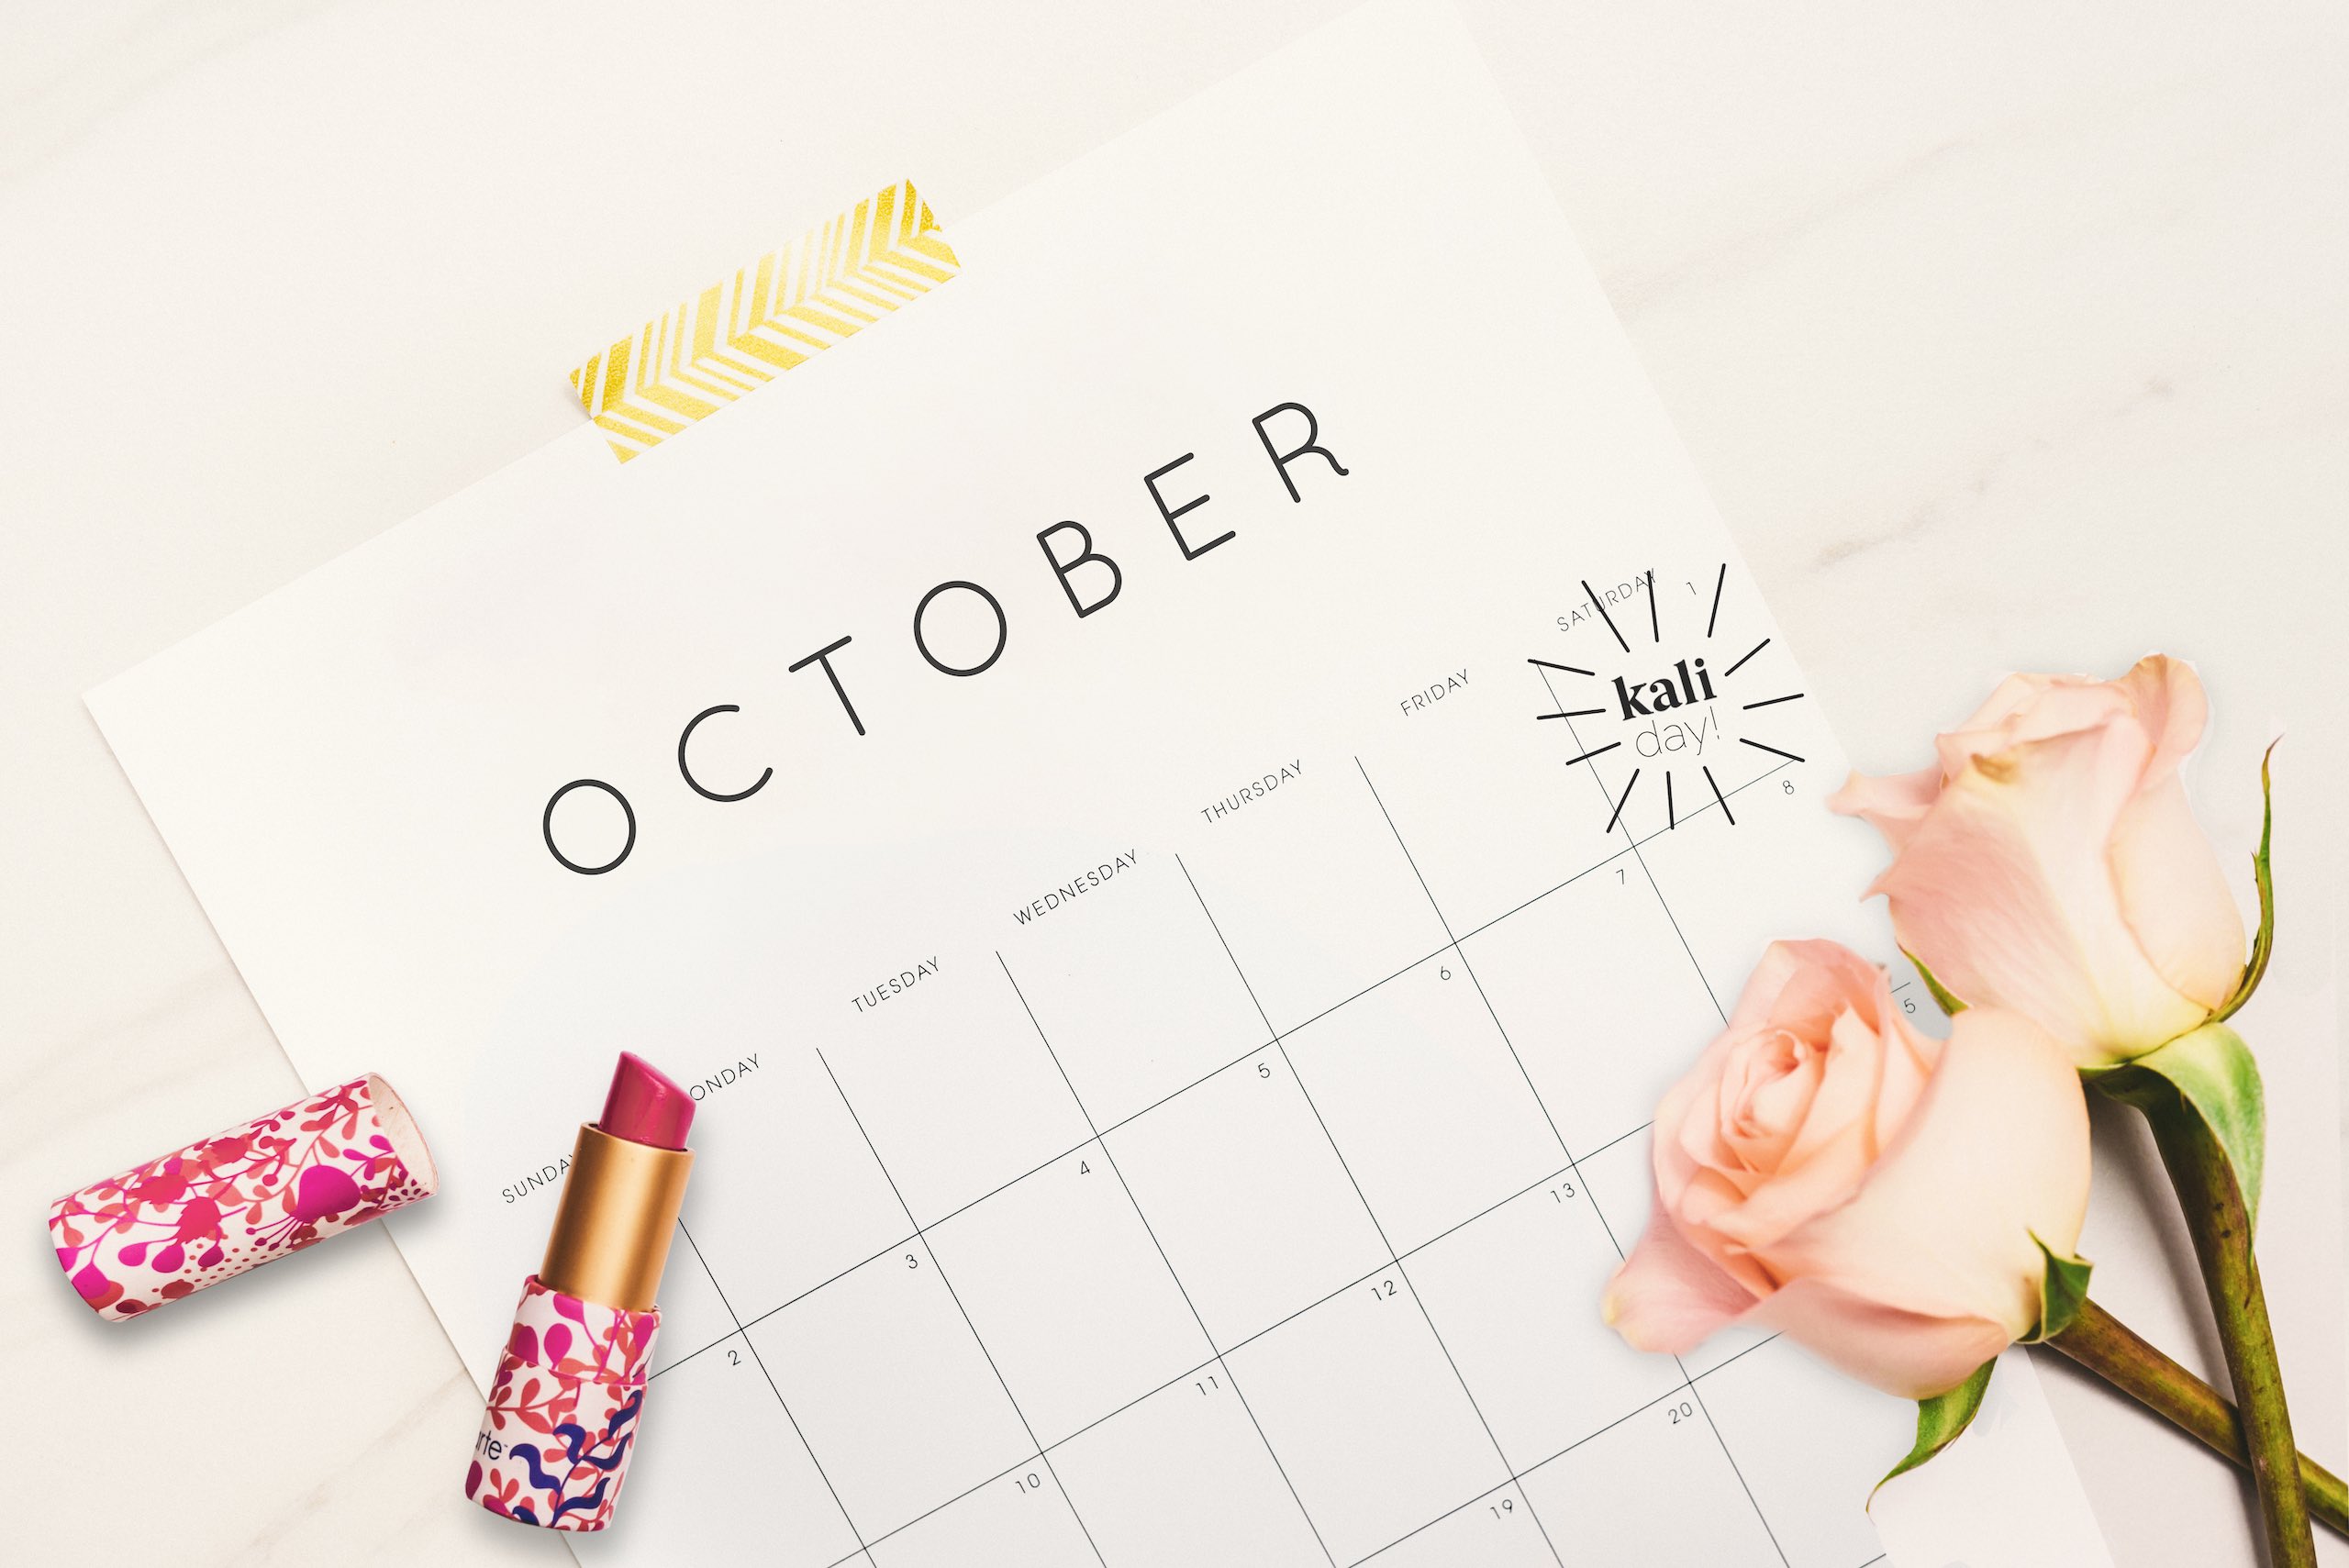 View of October Calendar with Kali Day entry with lipstick and pink roses